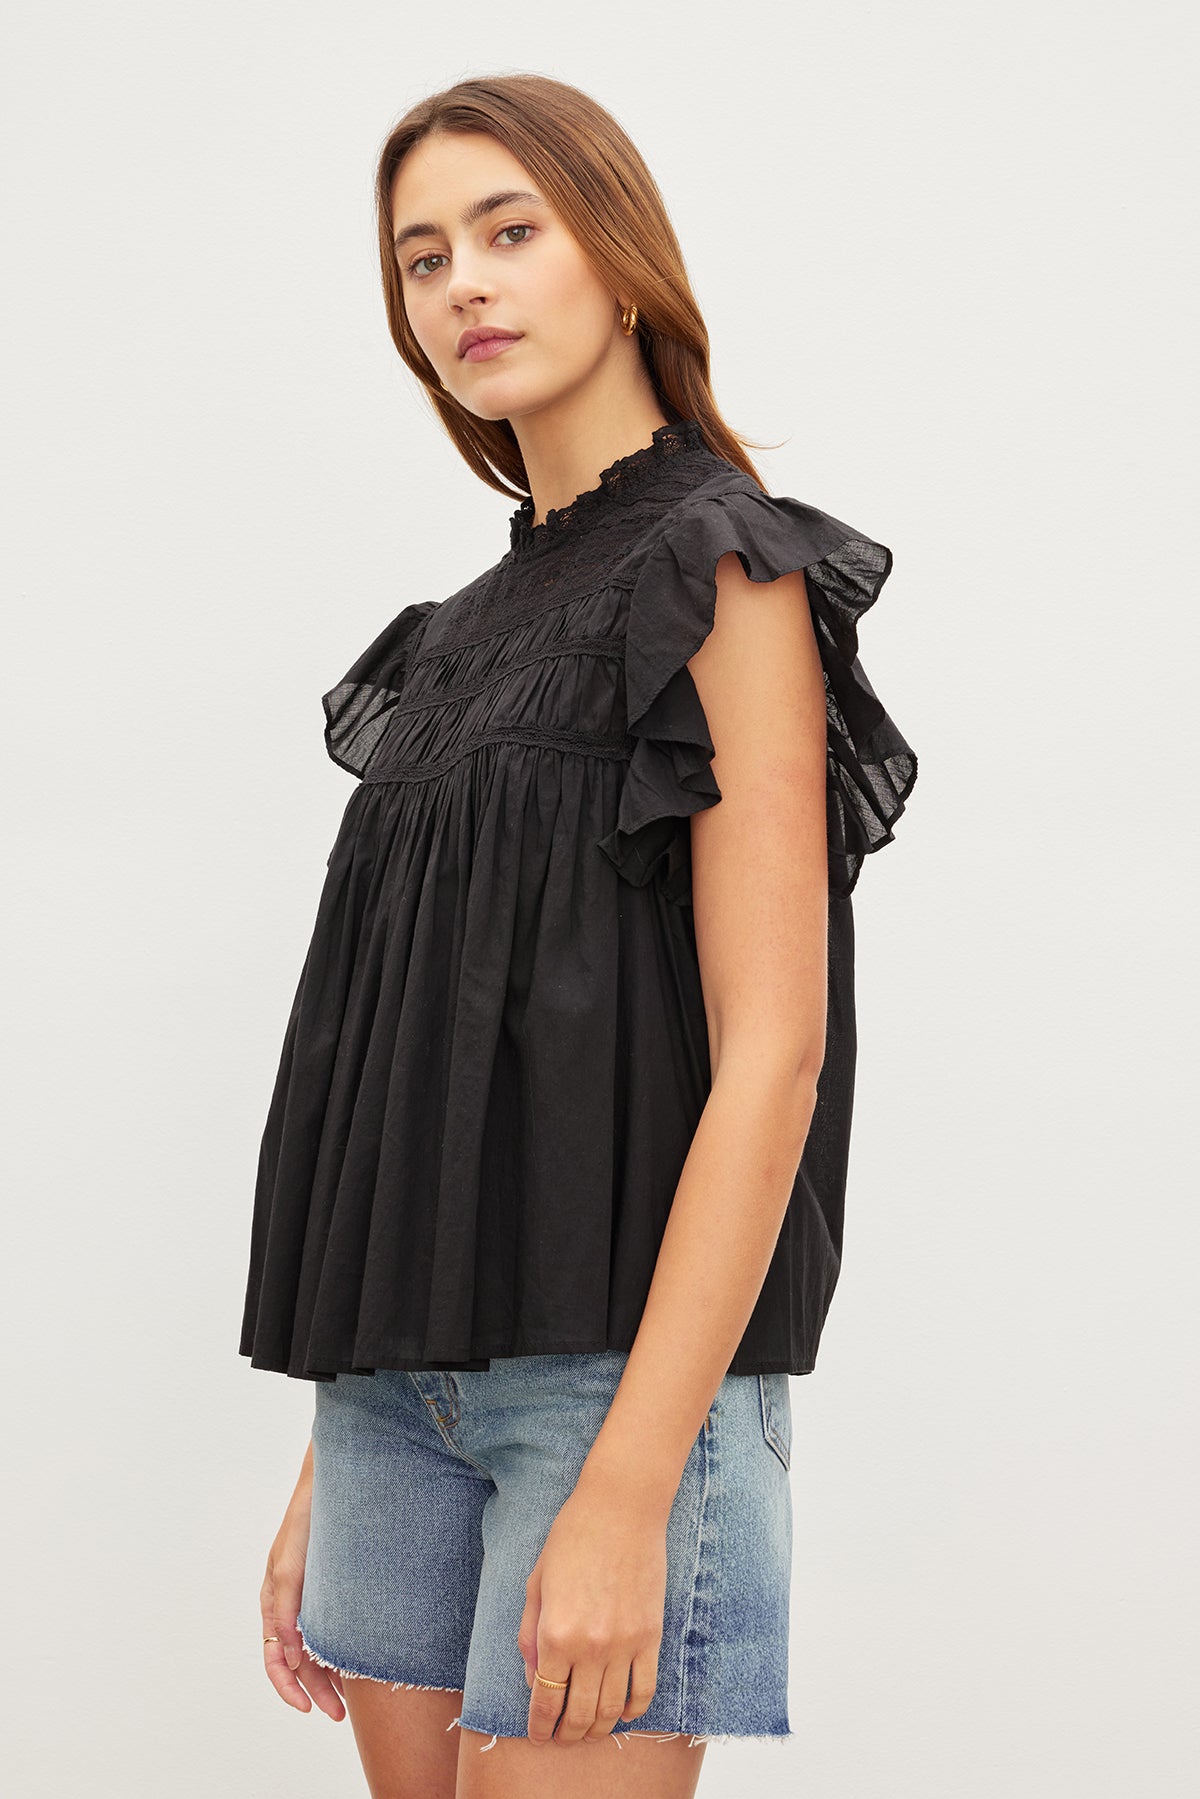   The model is wearing an INESSA COTTON LACE TOP by Velvet by Graham & Spencer with ruffled sleeves. 